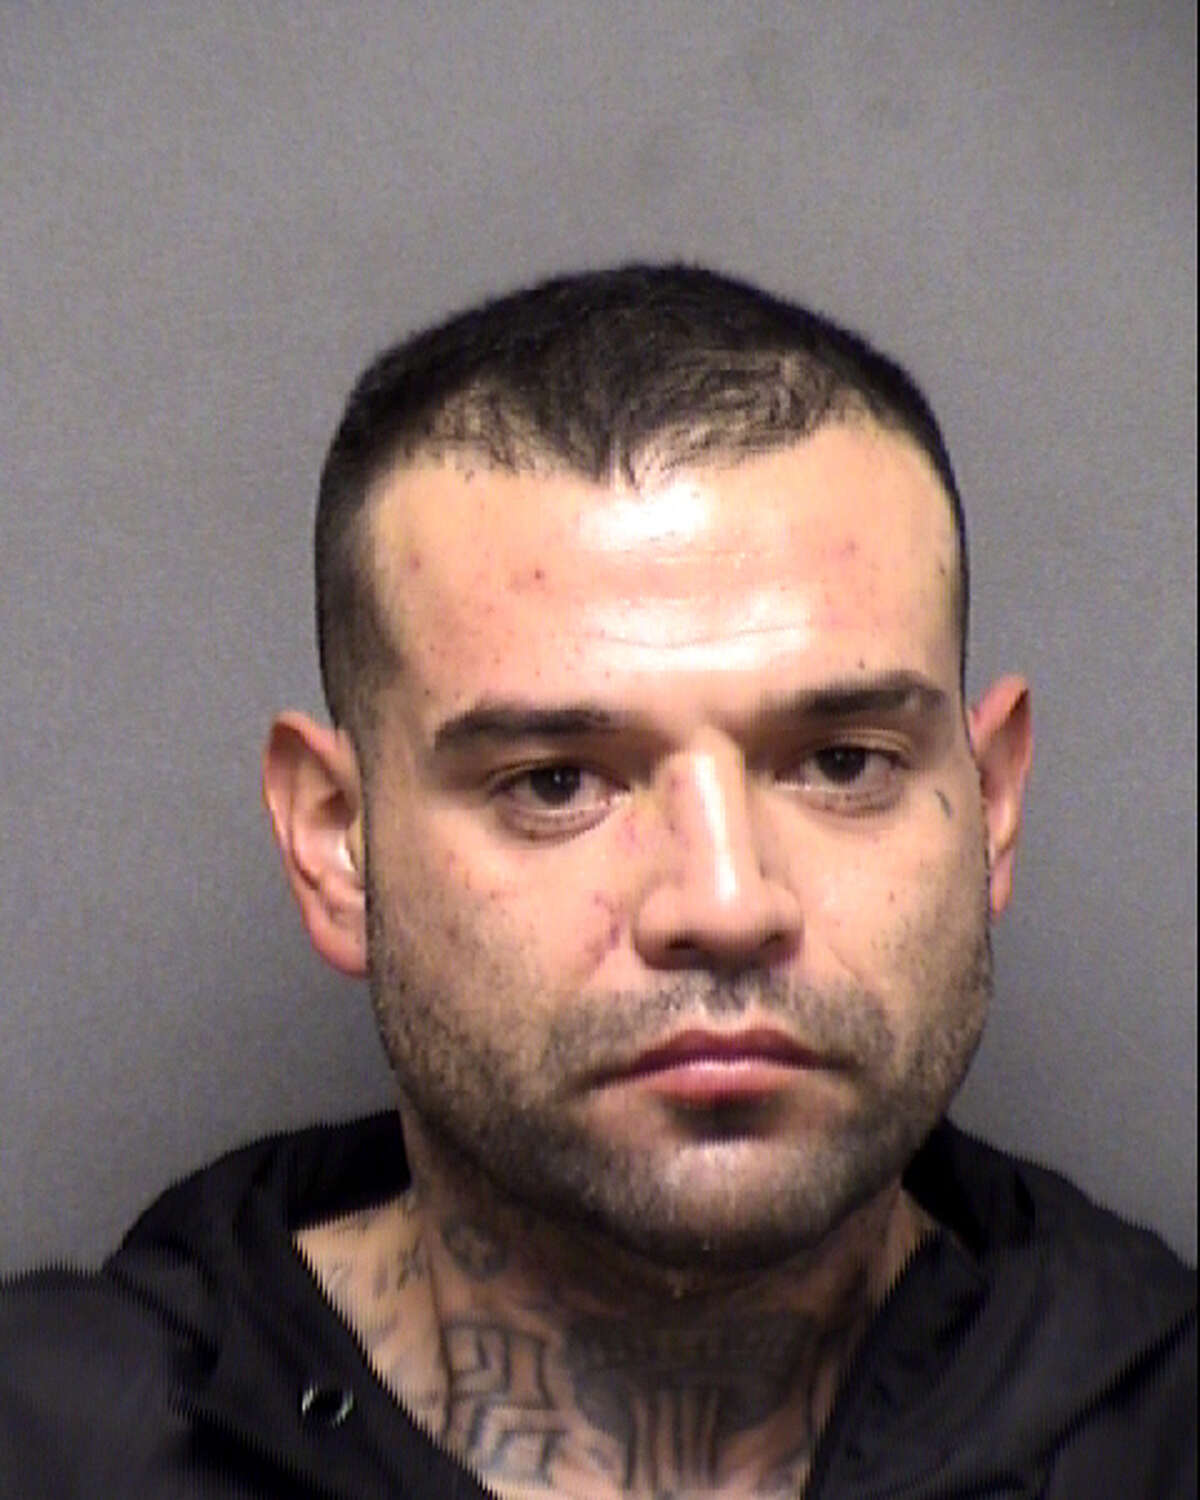 Kevin Lee Perez, 33, was charged with murder.